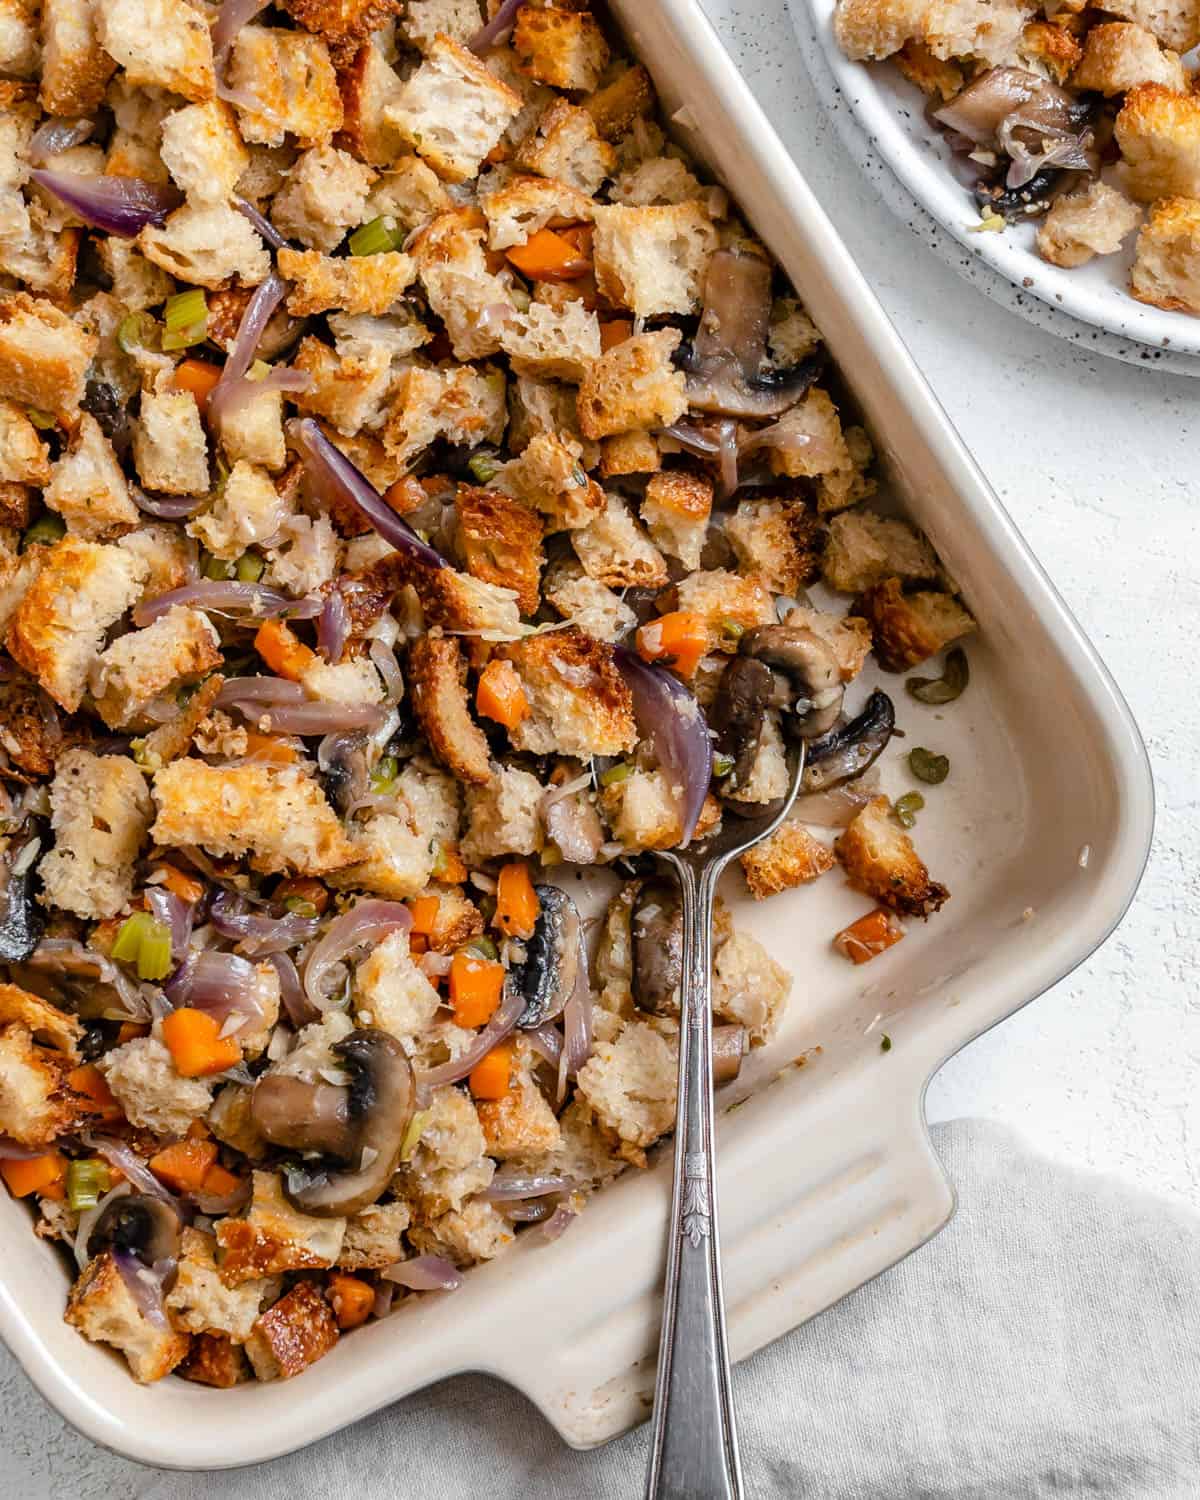 completed Easy Mushroom Stuffing Recipe in dish alongside a plated serving